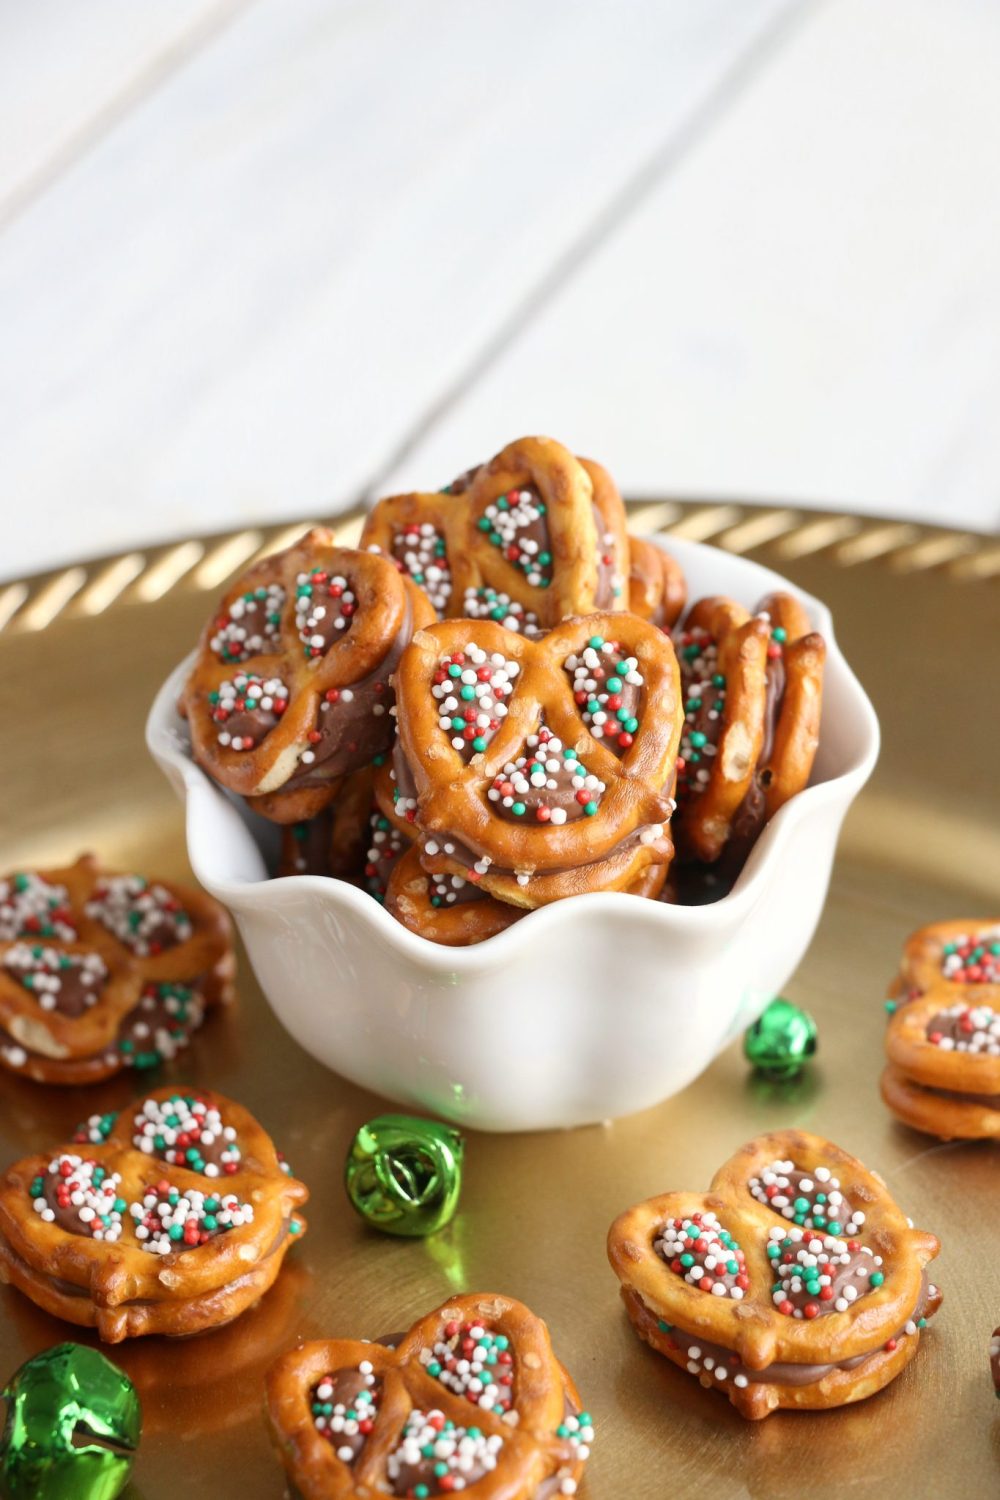 mini pretzels with a rolo candy and green and red sprinkles